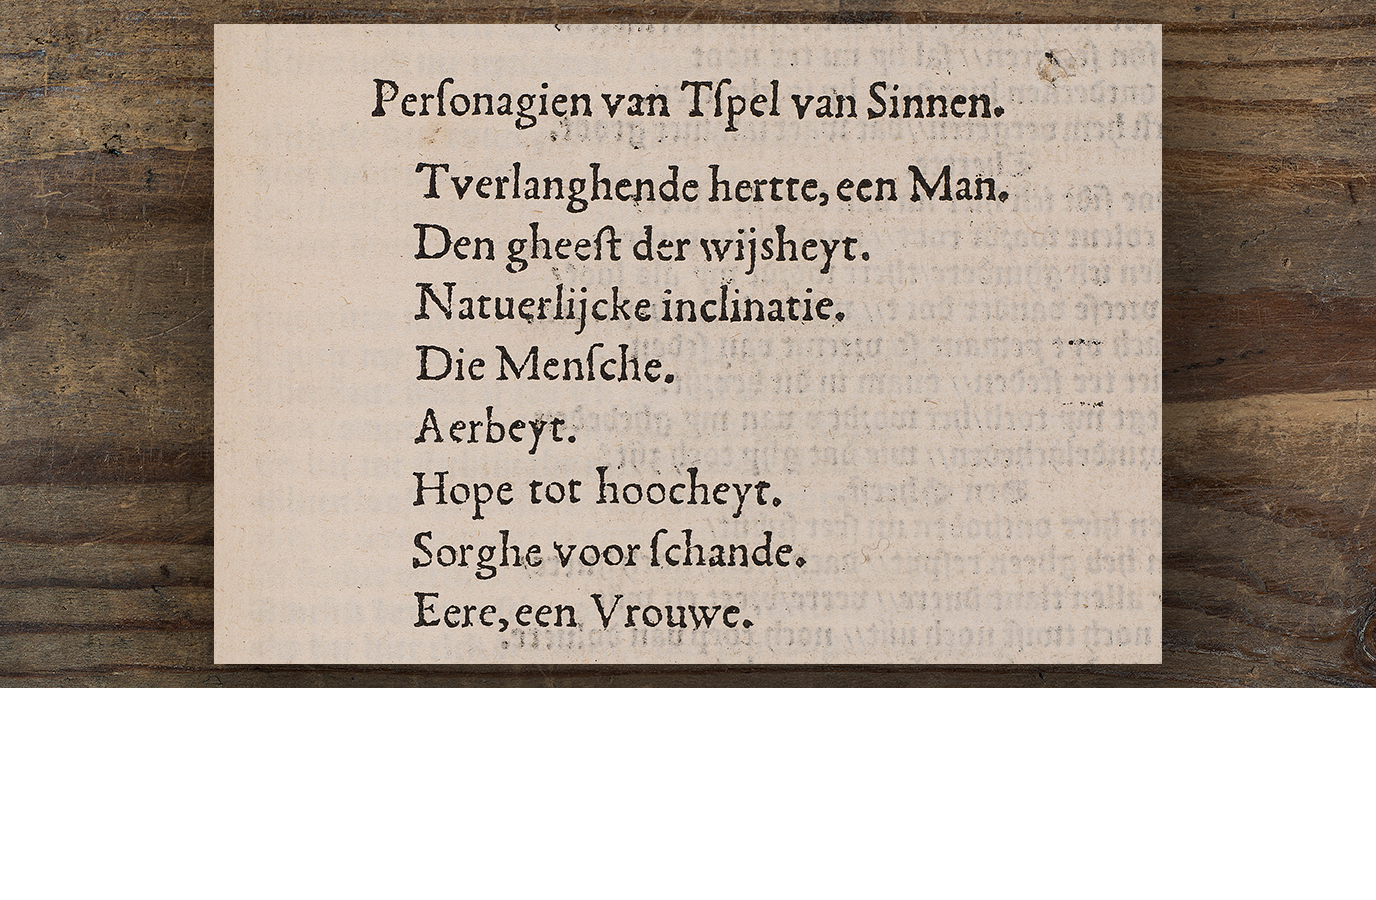 The dramatis personae (list of characters) of De Roose's morality play. Notice the names of the personifications: the Yearning Heart, the Spirit of Wisdom, Natural Inclination, Mankind, Labour, Hope of Greatness, Fear of Disgrace and Honour.